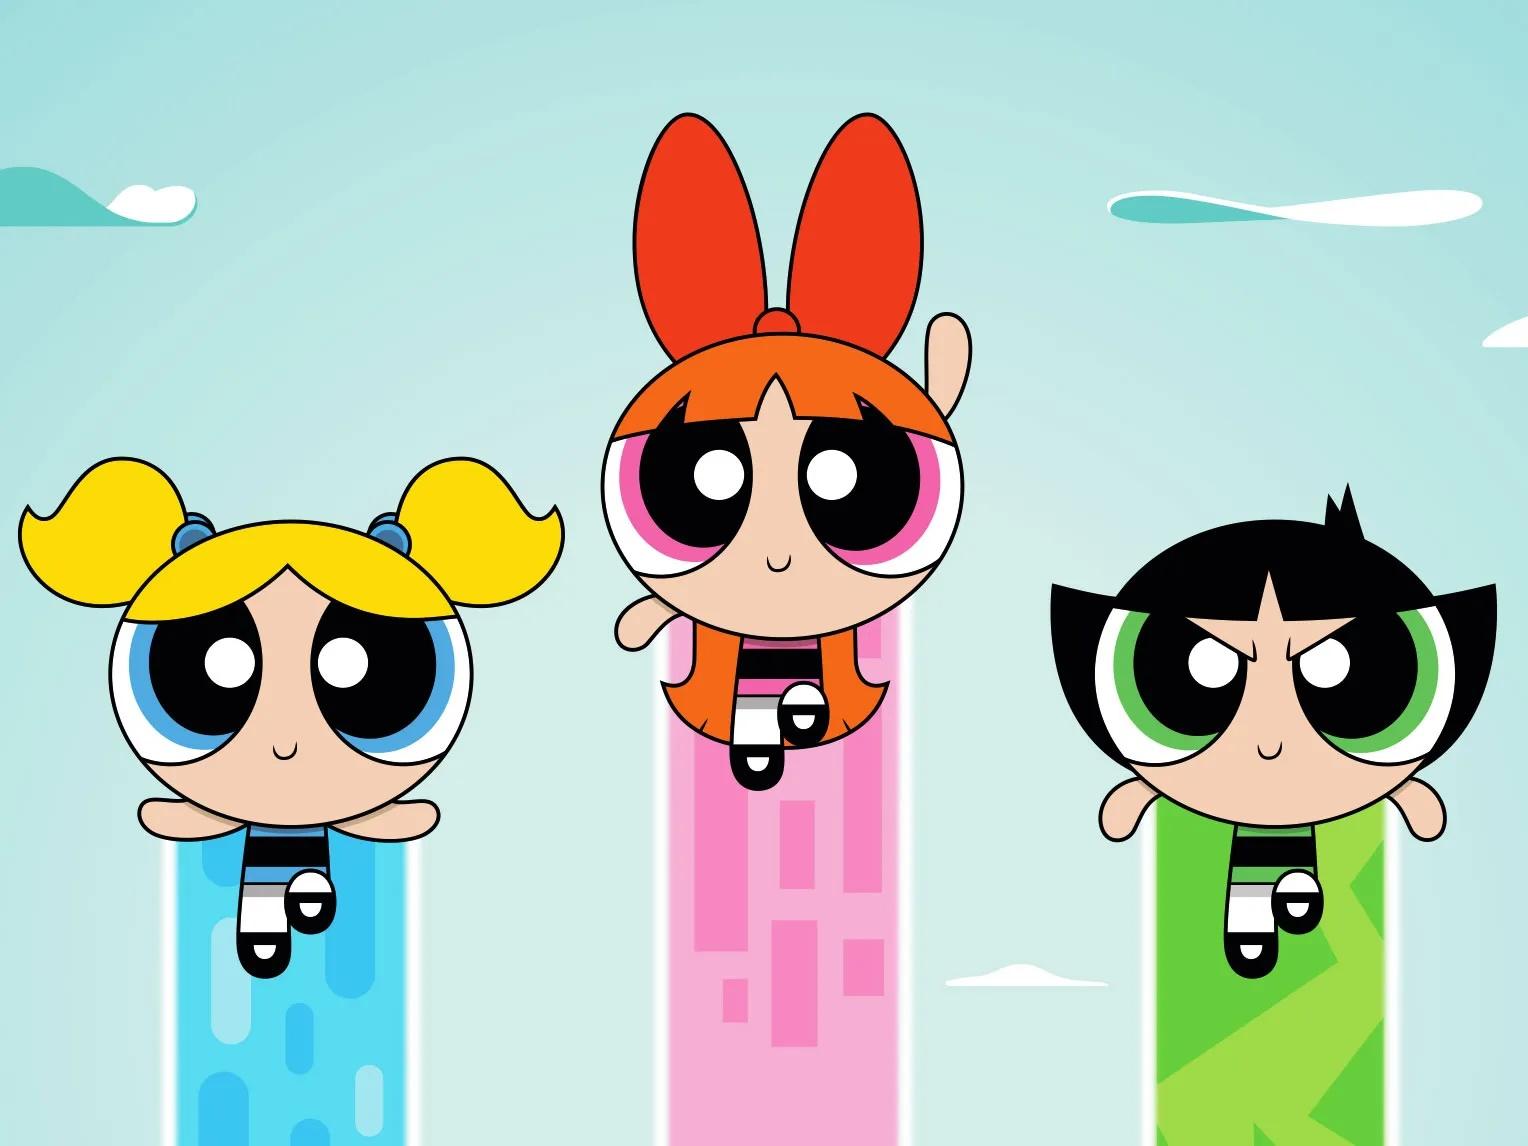 The PowerPuff Girls pop-up cafe has opened in Al Ain